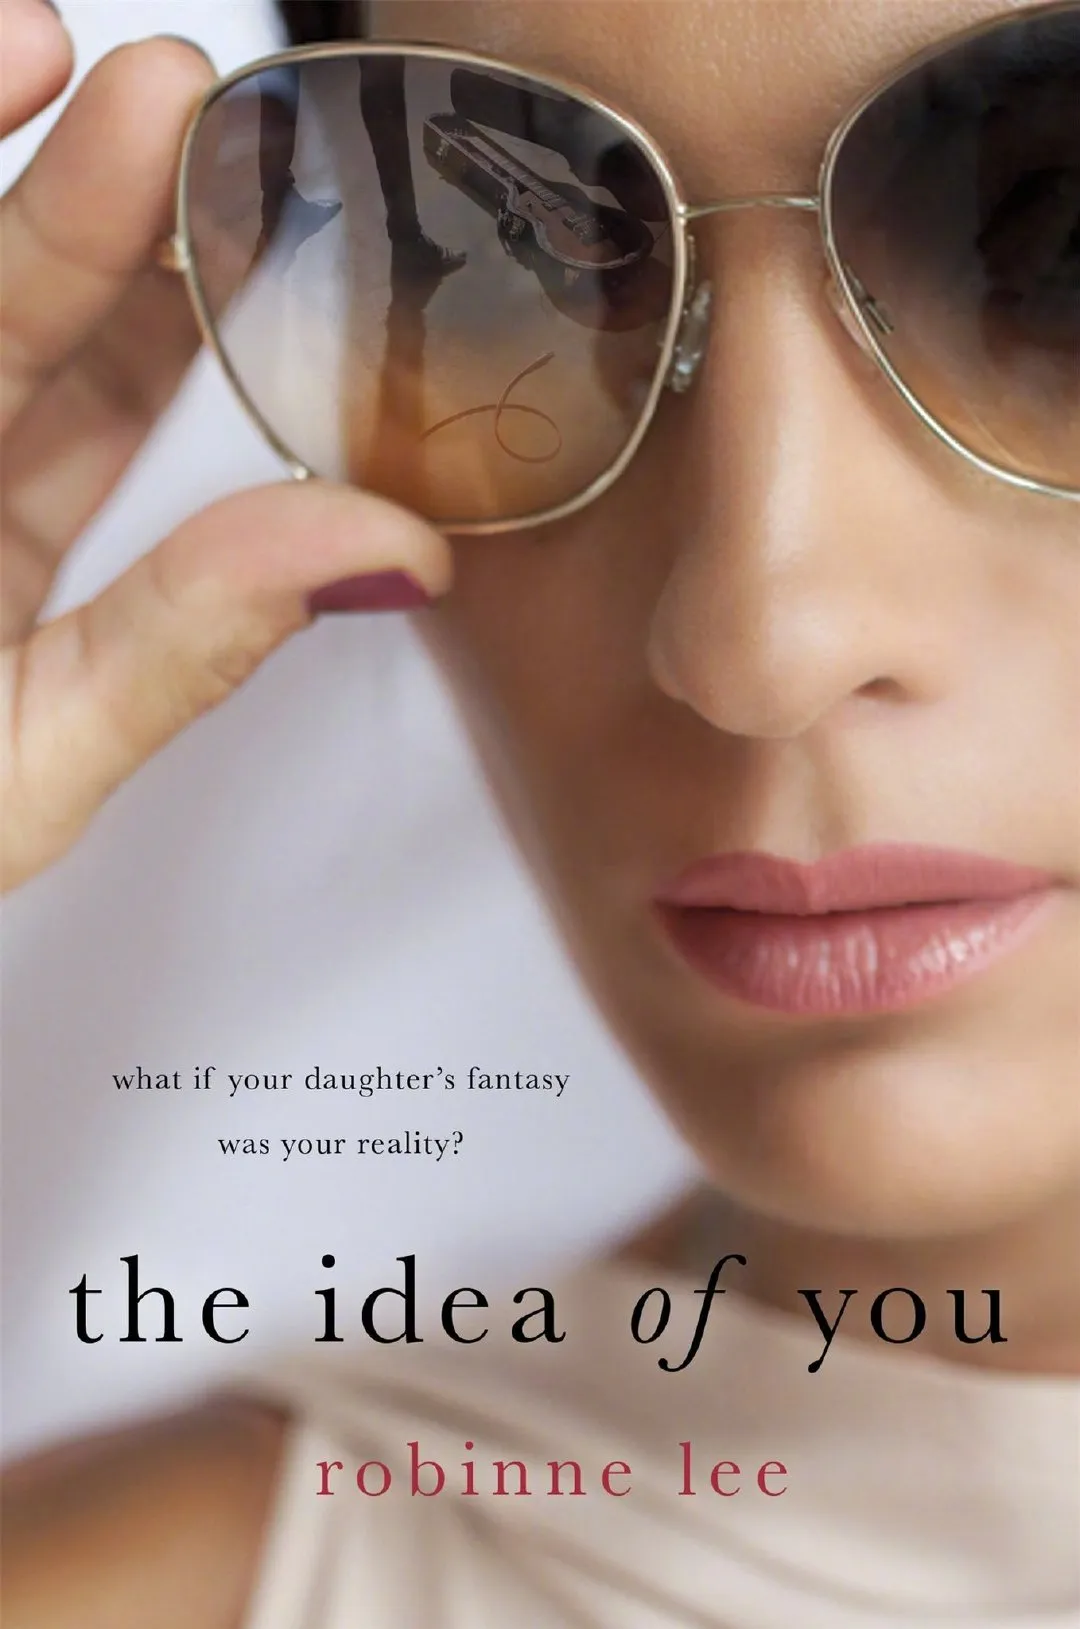 Anne Hathaway to star in new film 'The Idea of You' ,directed by Michael Showalter | FMV6